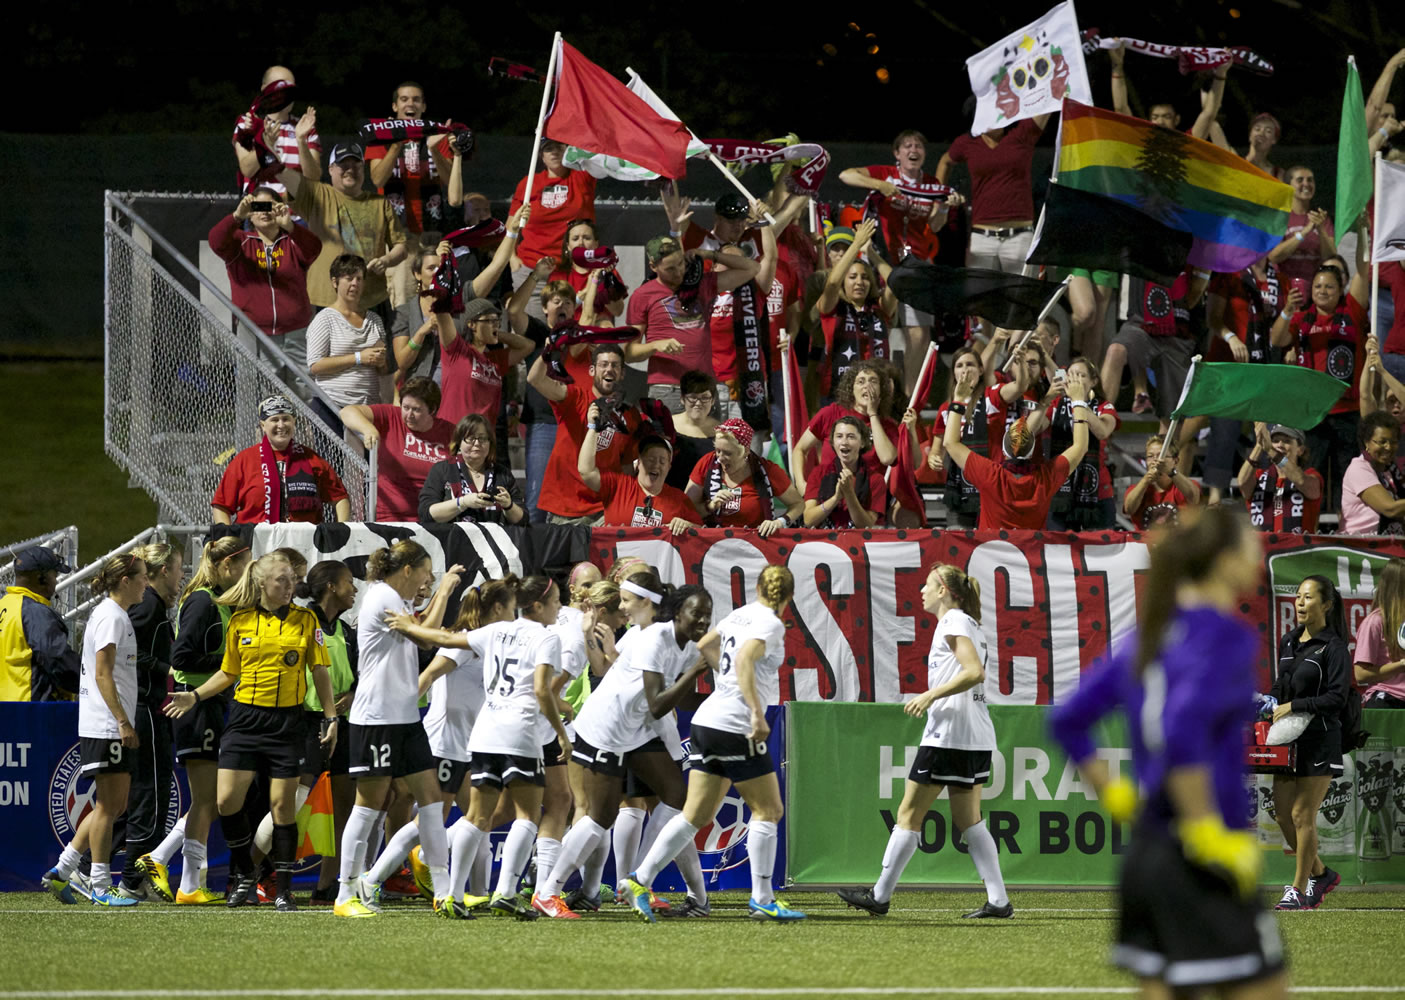 Fans celebrate with the Portland Thorns after Christine Sinclair  shot the winning goal to give the Thorns a 2-1 win over the Seattle Reign during the Thorns' final match of the regular season Saturday  in Tukwila.